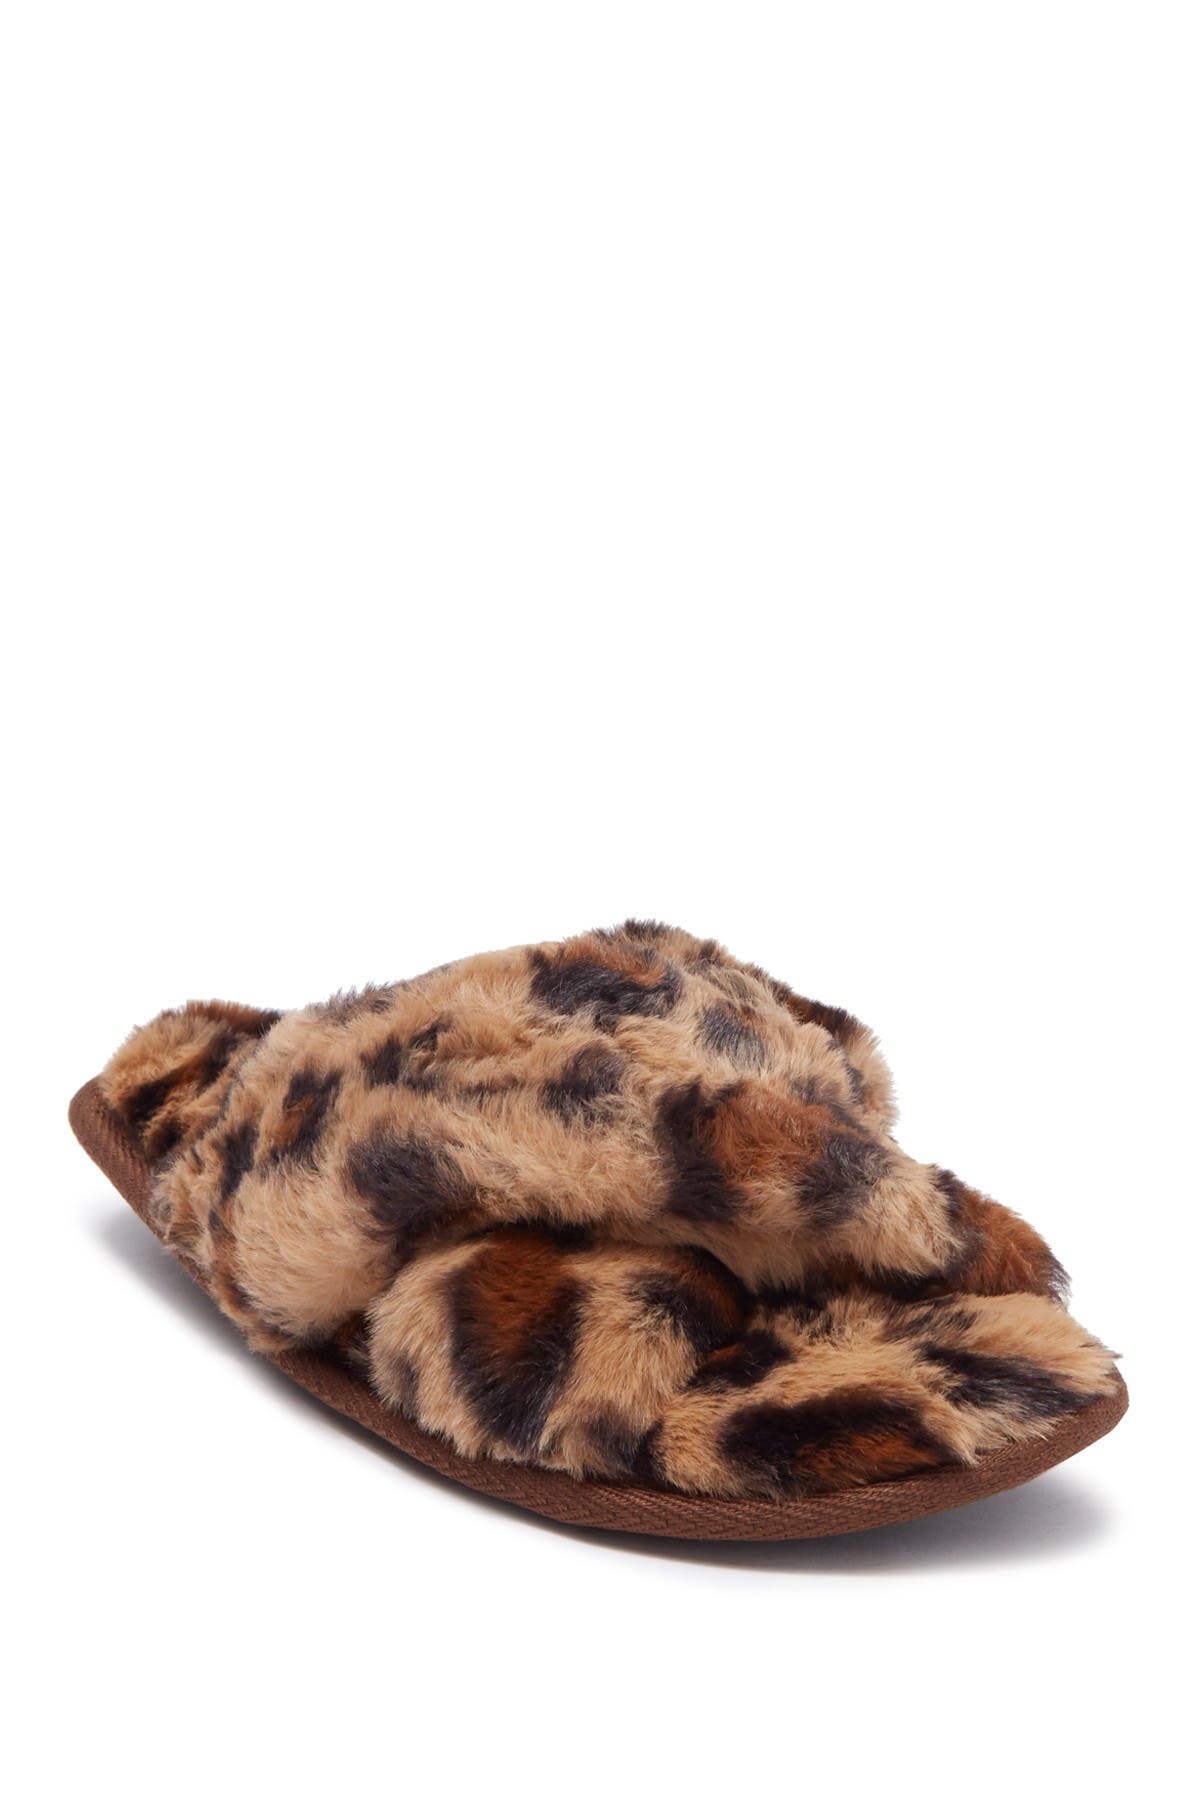 nordstrom cheetah shoes